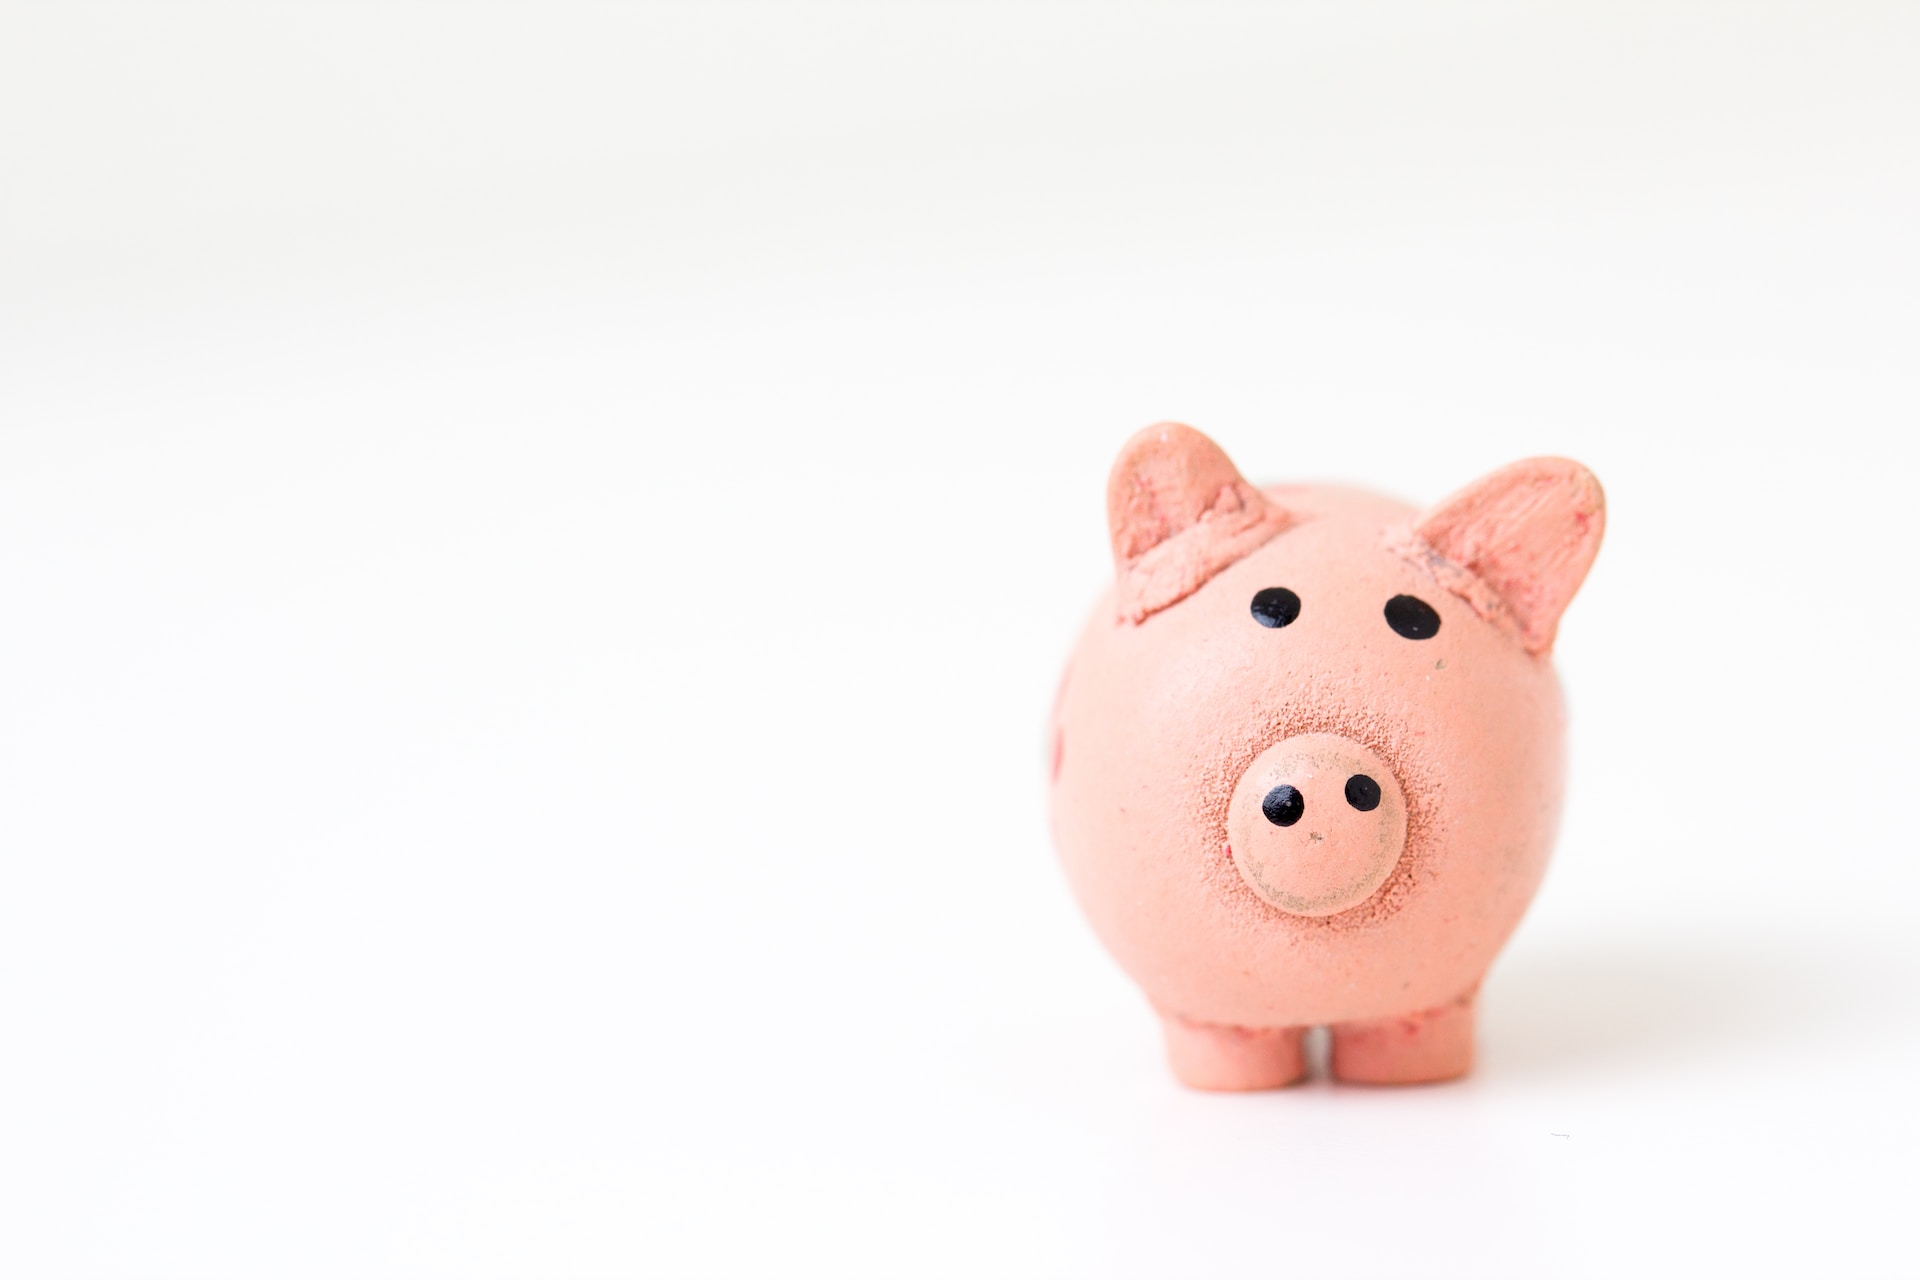 A minimal photo of a pink piggy bank on white background